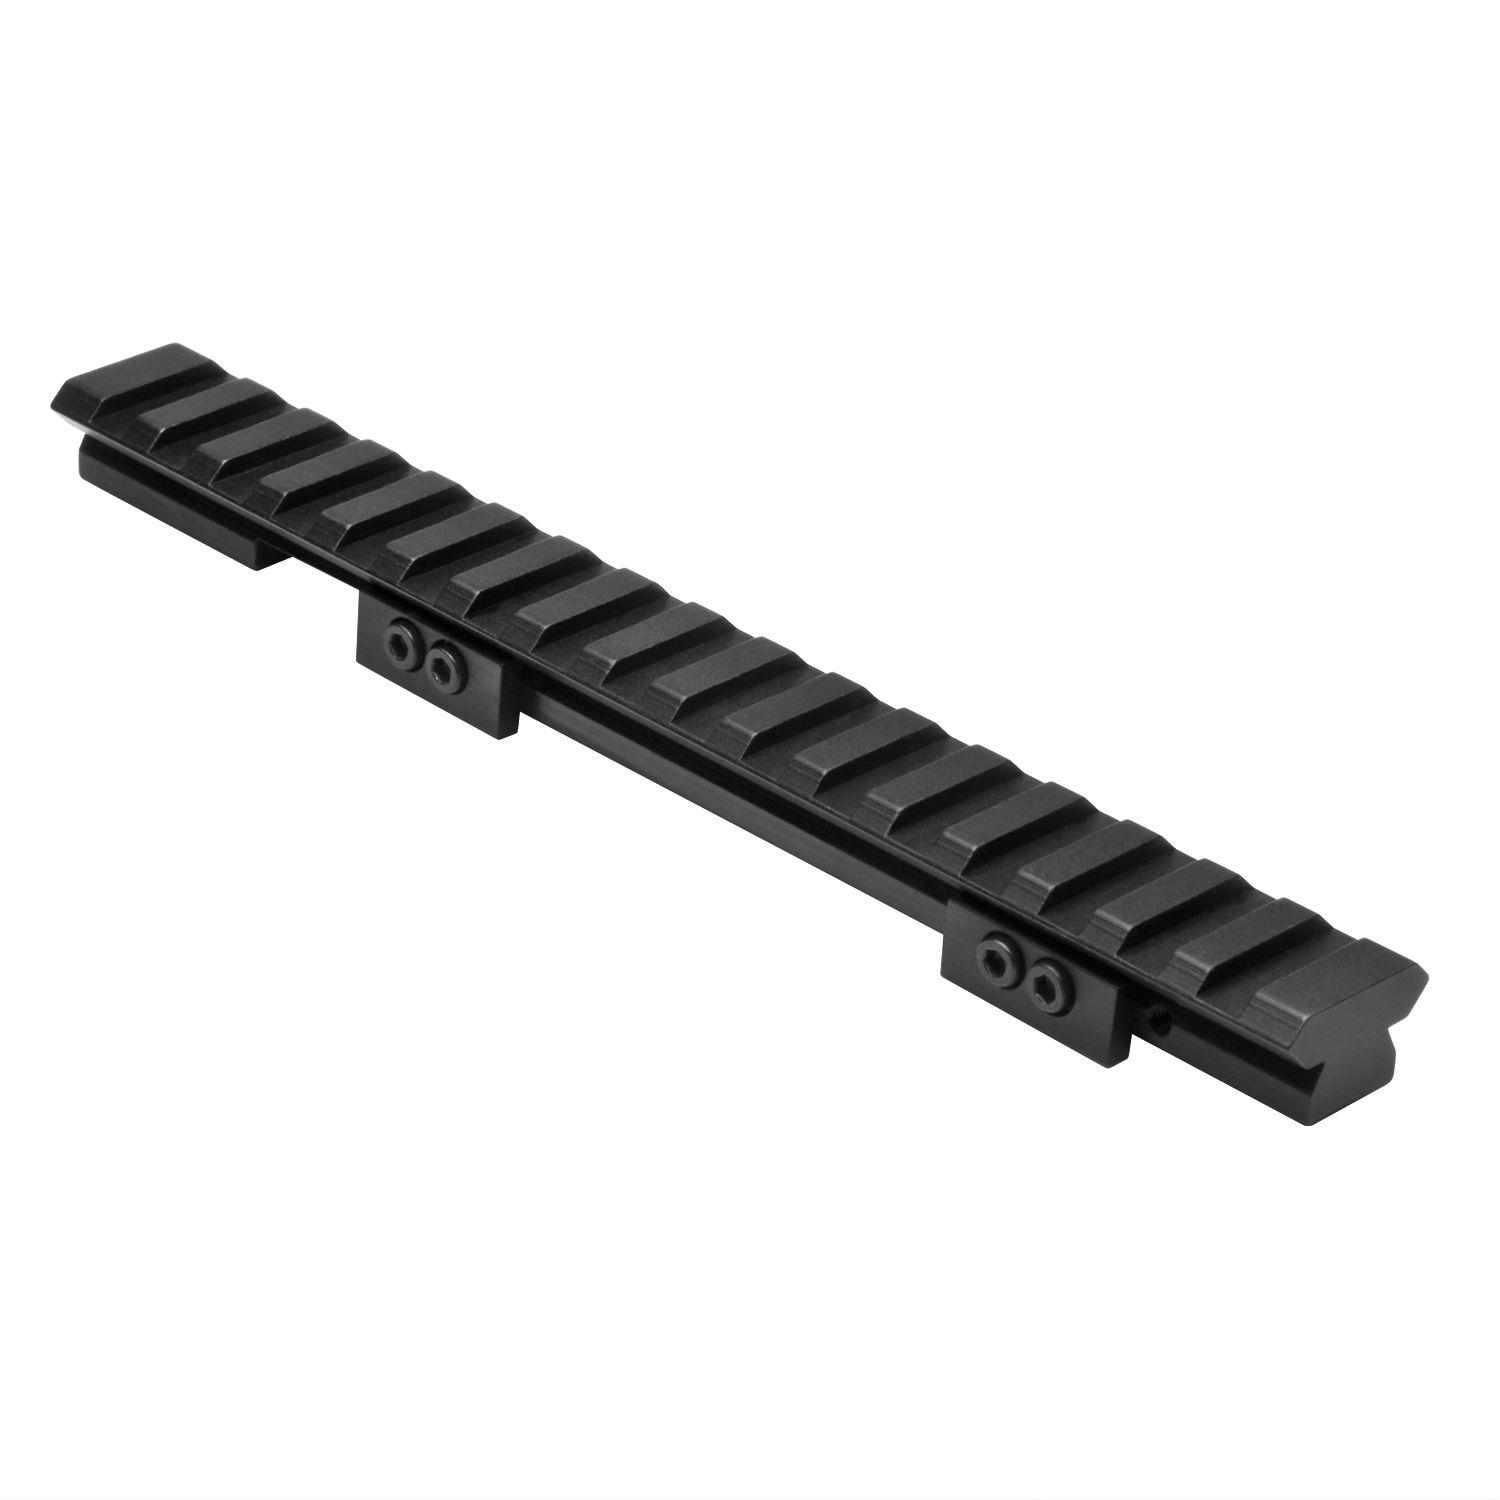 Upgrade your Ruger 10/22 with this sleek Picatinny rail. Black anodized aluminum construction, easy installation onto pre-drilled receiver holes. Maintain factory iron sights with centerline sight channel. Length: 4.7” 